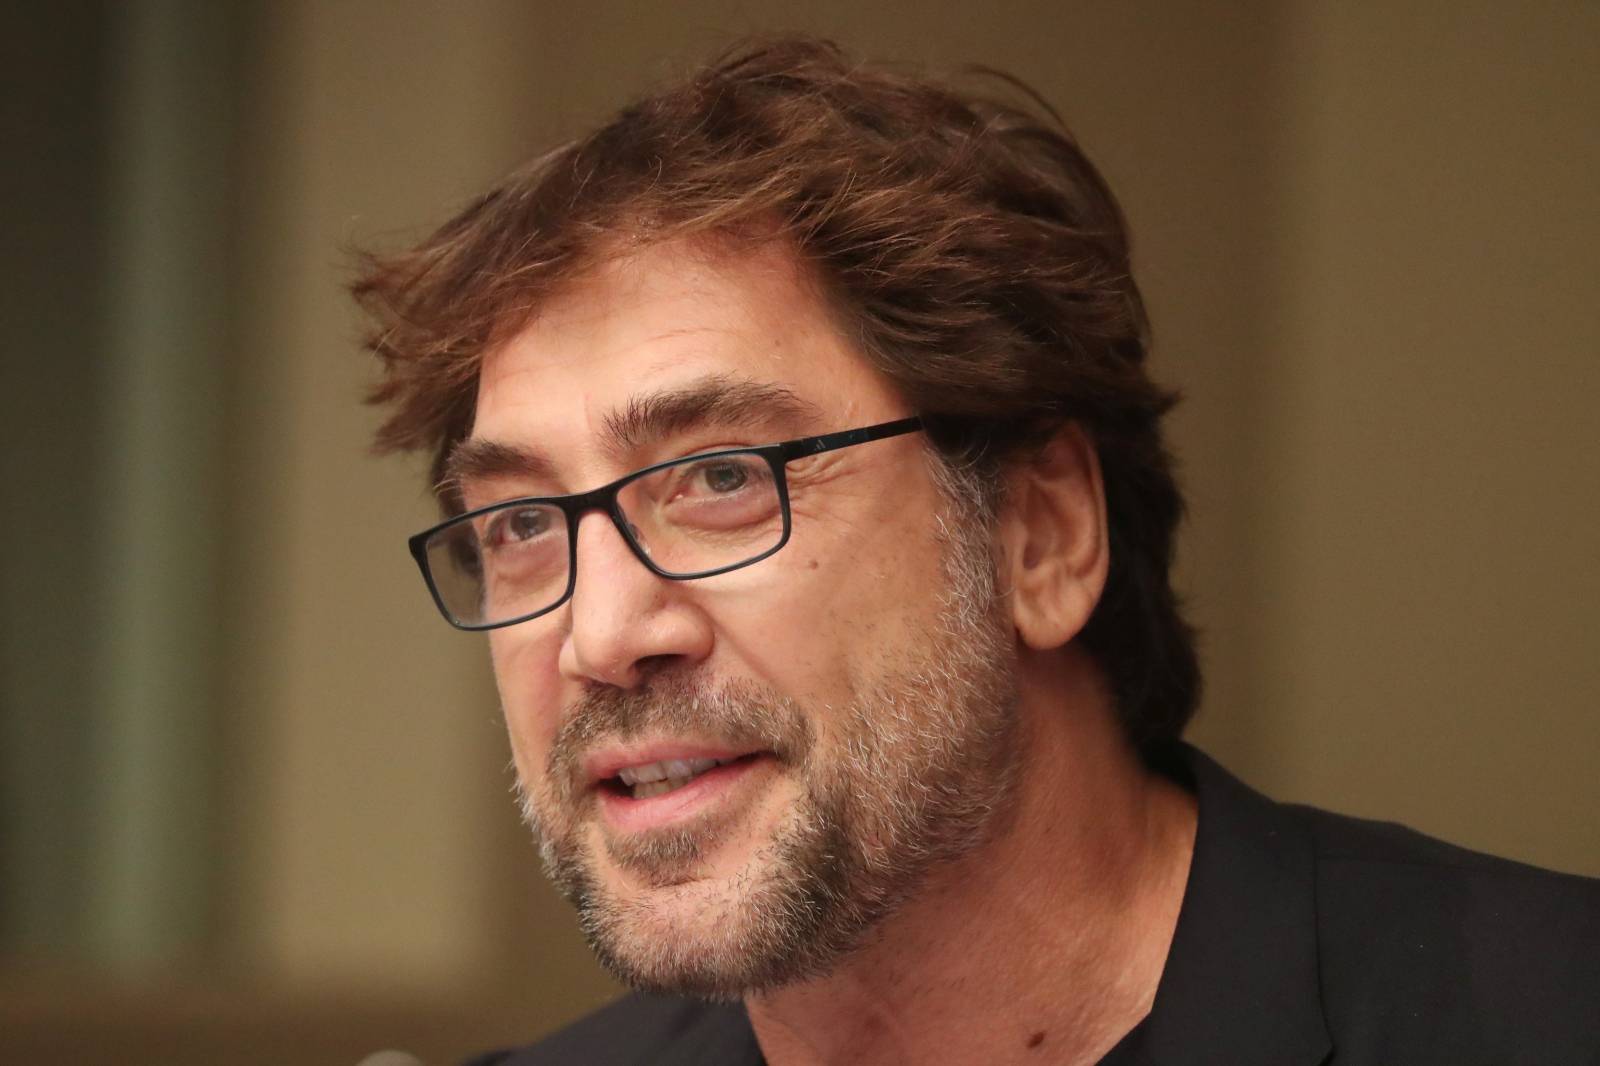 Actor Javier Bardem speaks about a Global Ocean Treaty to protect the oceans with the Greenpeace and High Seas Alliance at the United Nations headquarters in New York